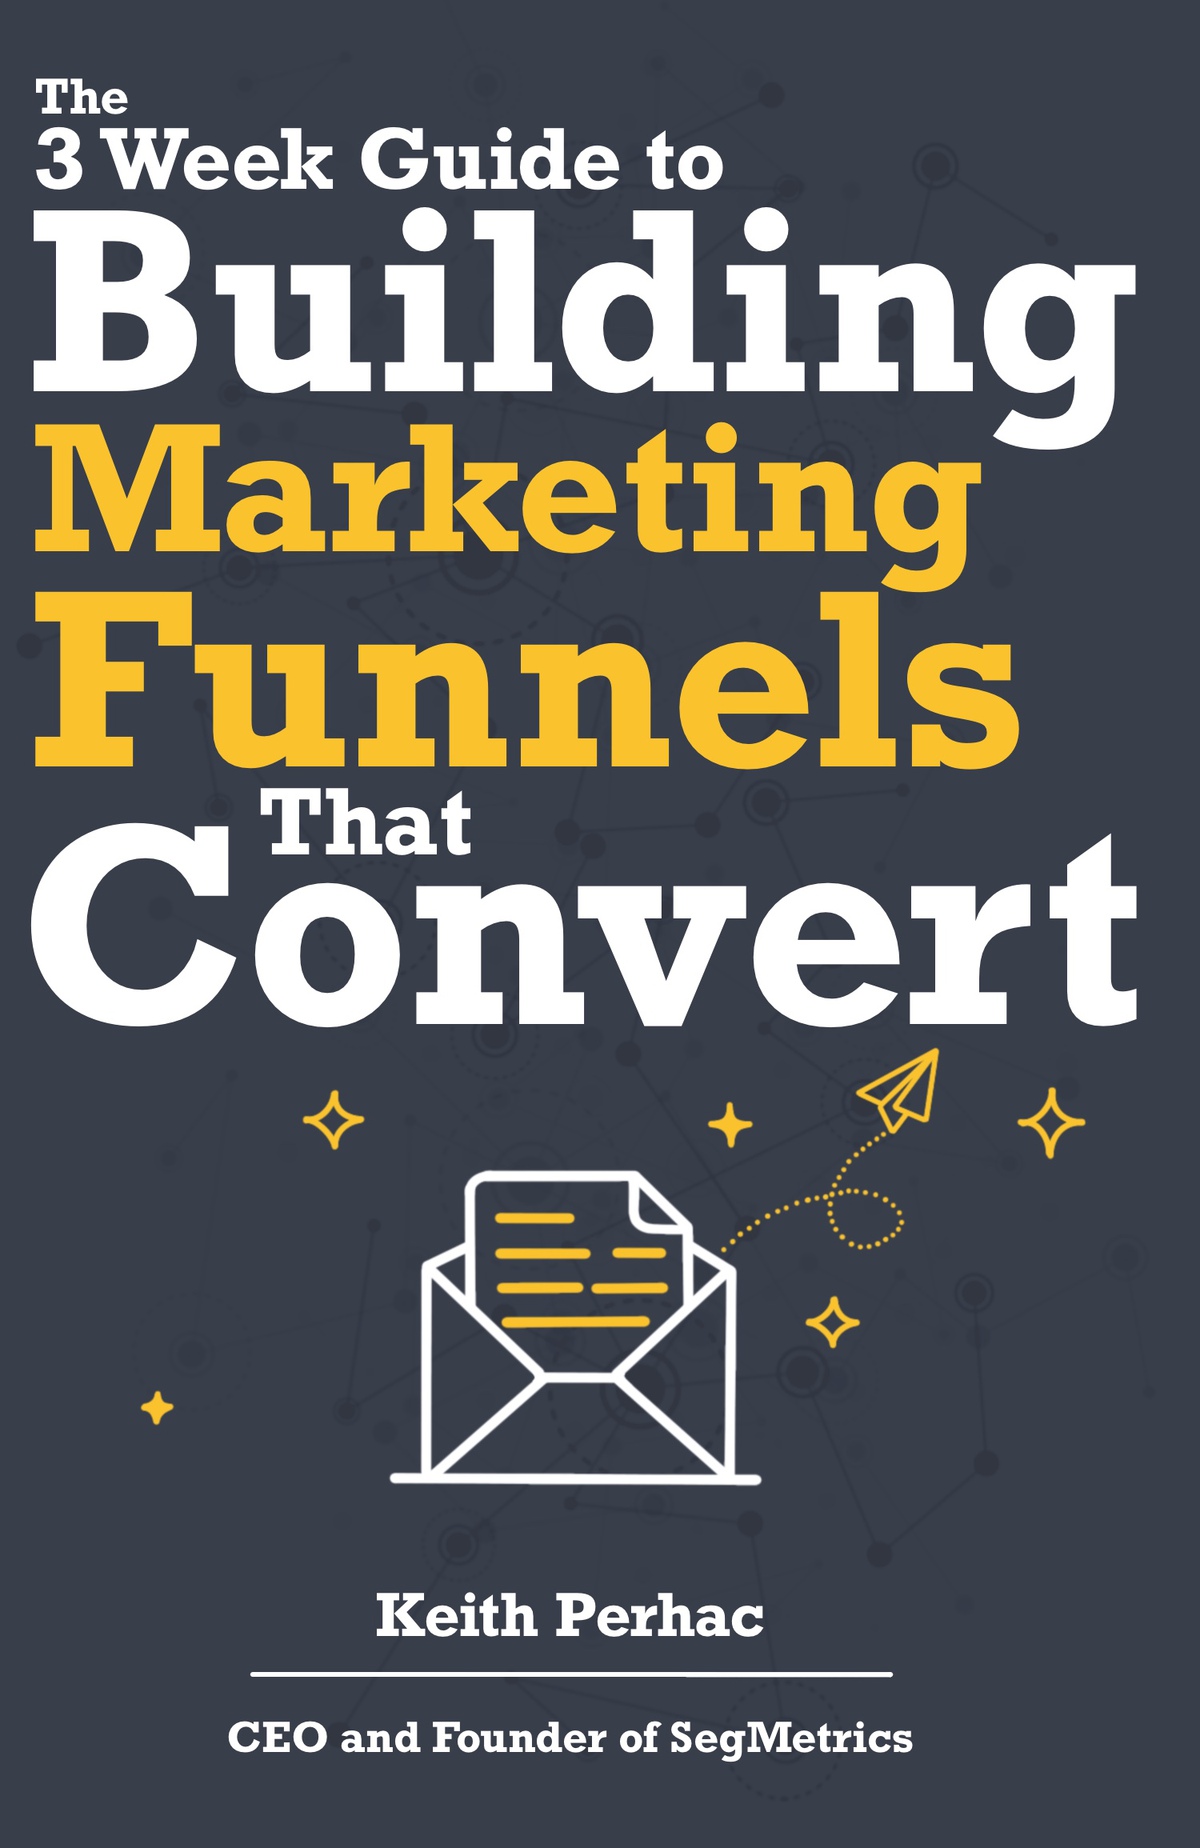 3 Week Guide to Building Marketing Funnels that Convert